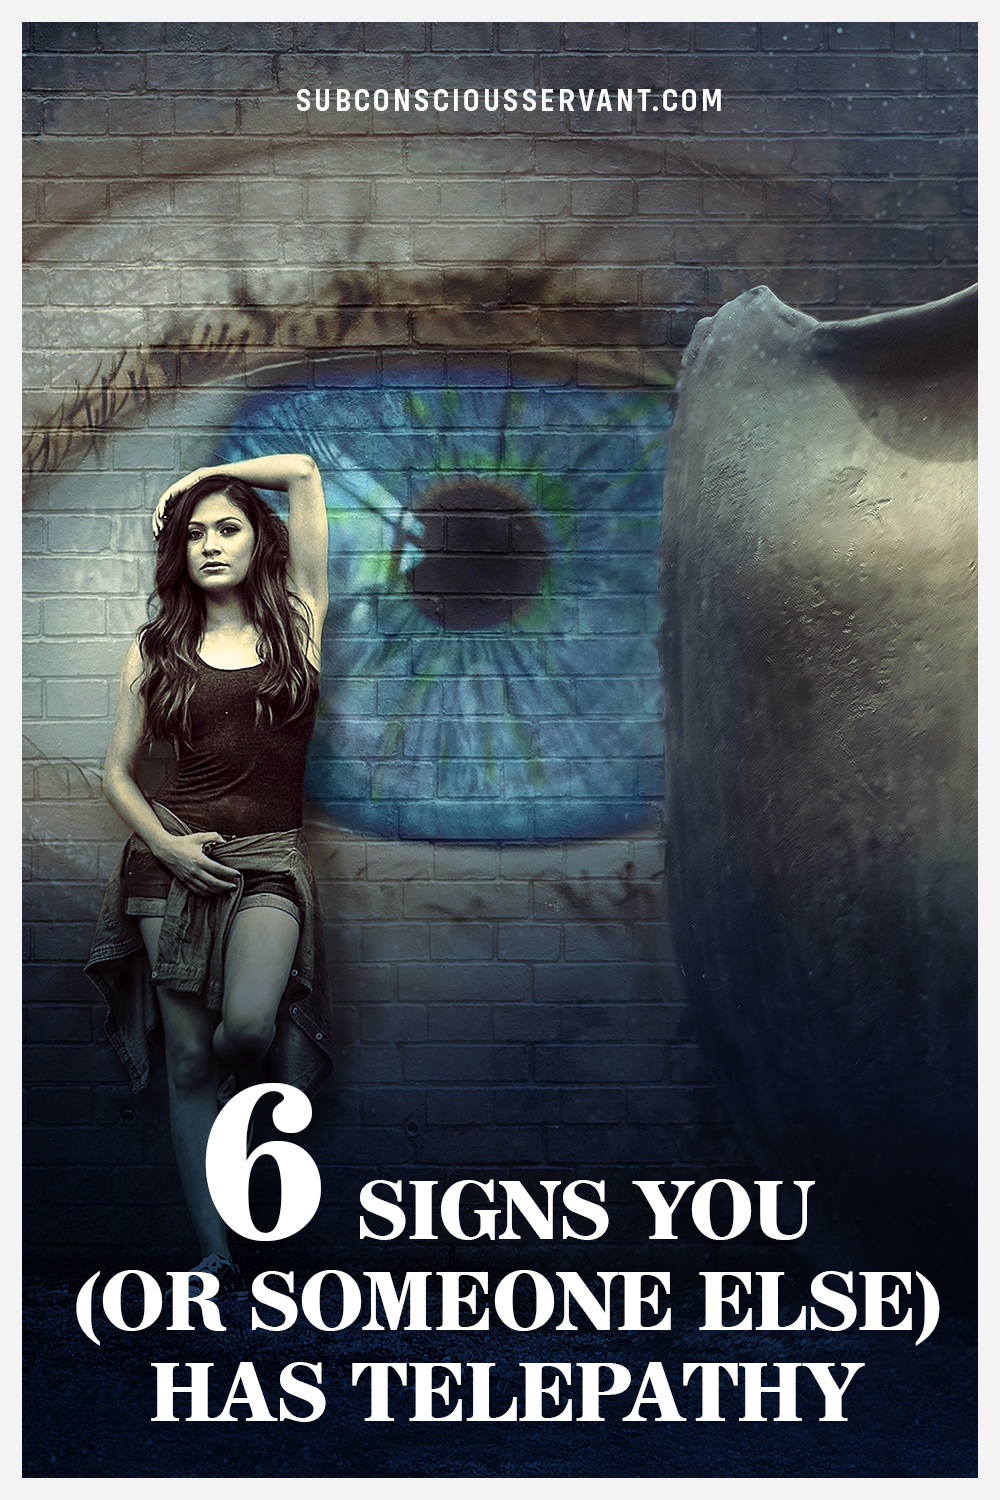 Telepathic Abilities: 6 Signs That You (Or Someone Else) Has Telepathy